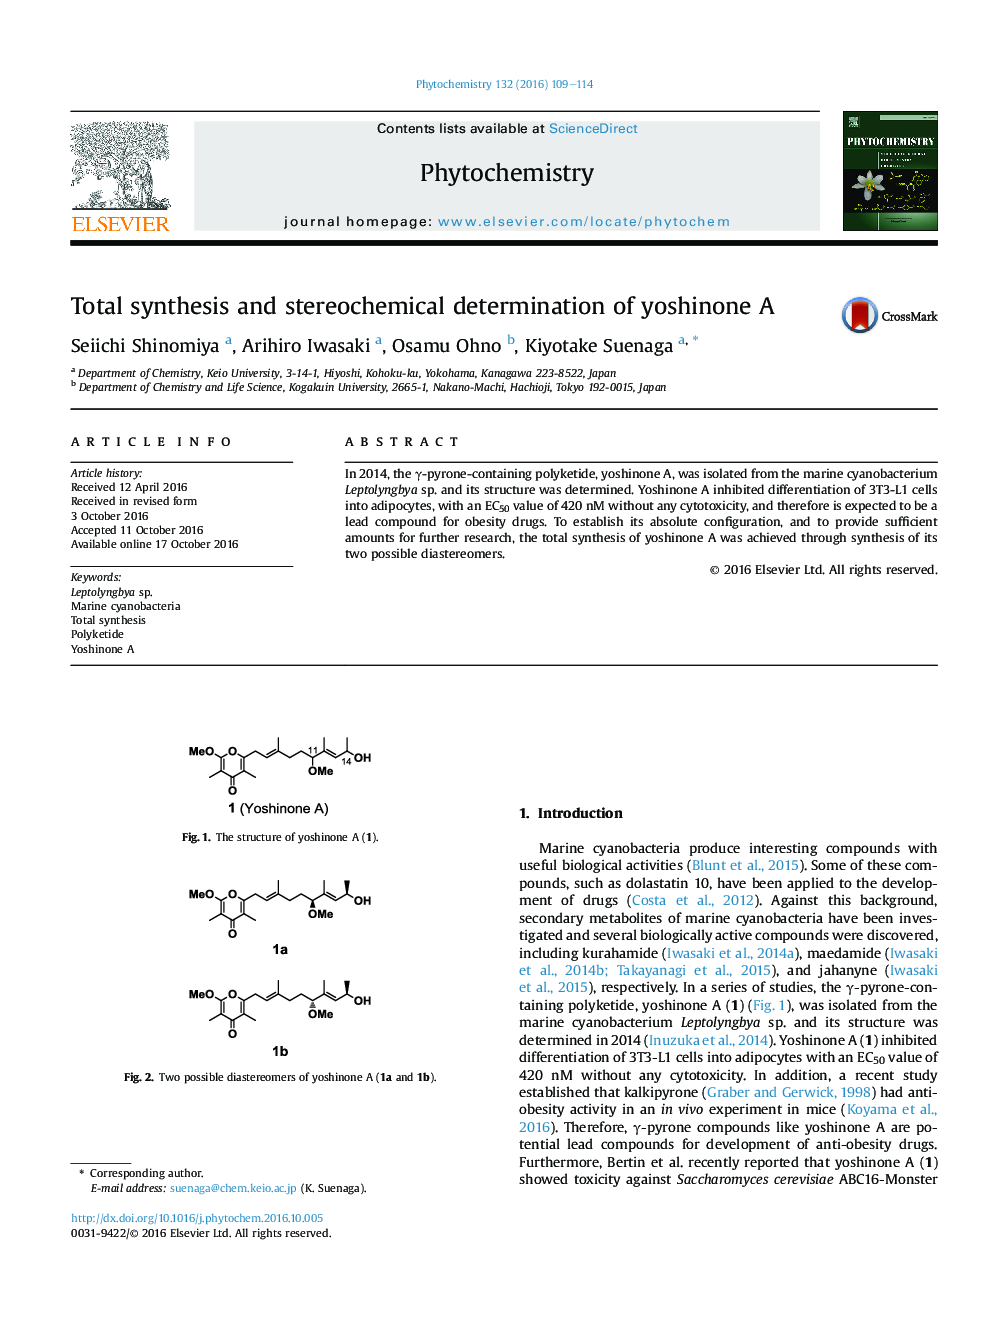 Total synthesis and stereochemical determination of yoshinone A